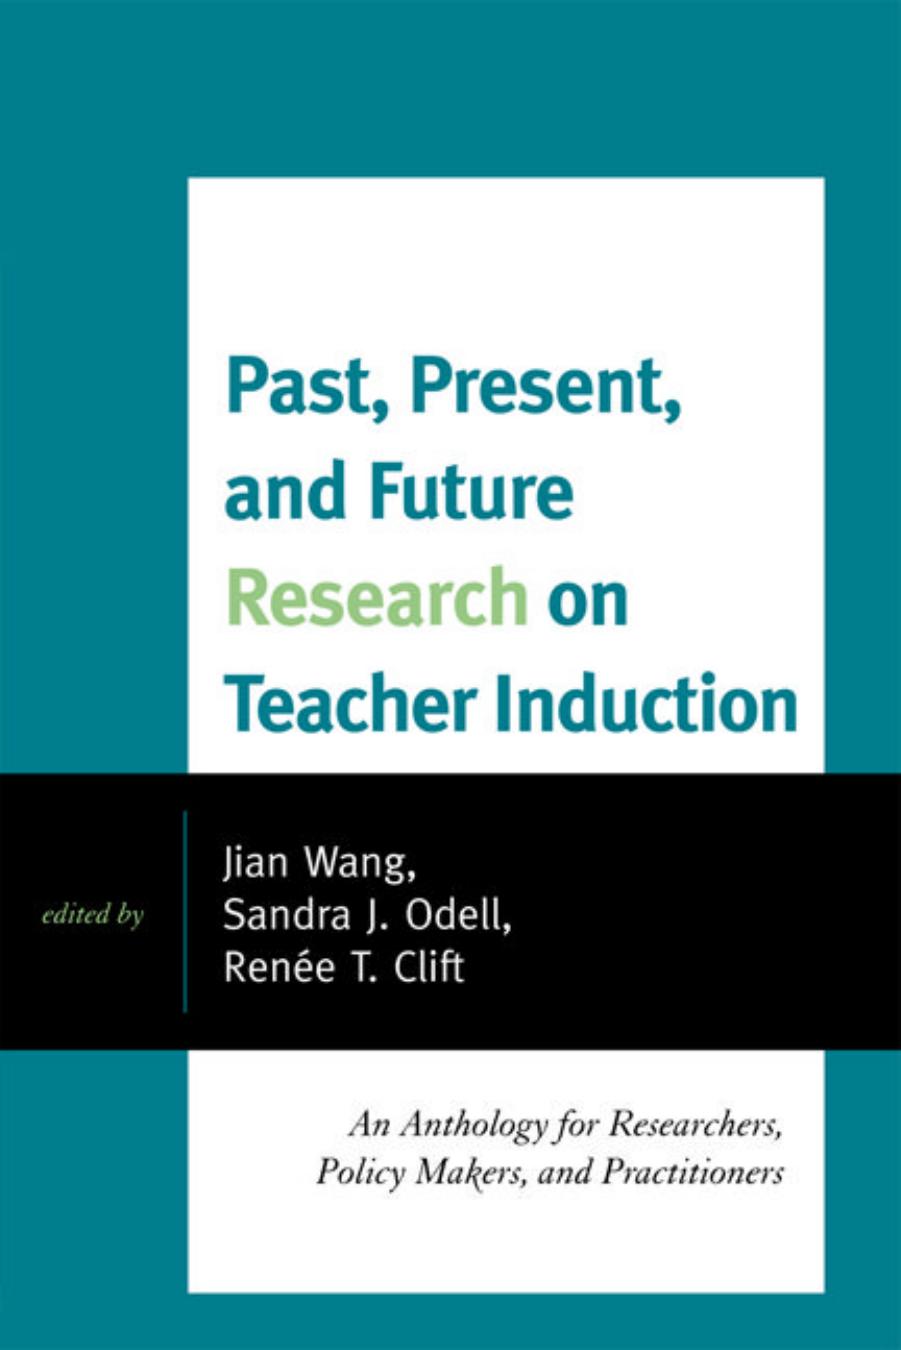 Past, Present, and Future Research on Teacher Induction  by Wang, Jian,Odell, Sandra J.,Clift, Renee Tipton